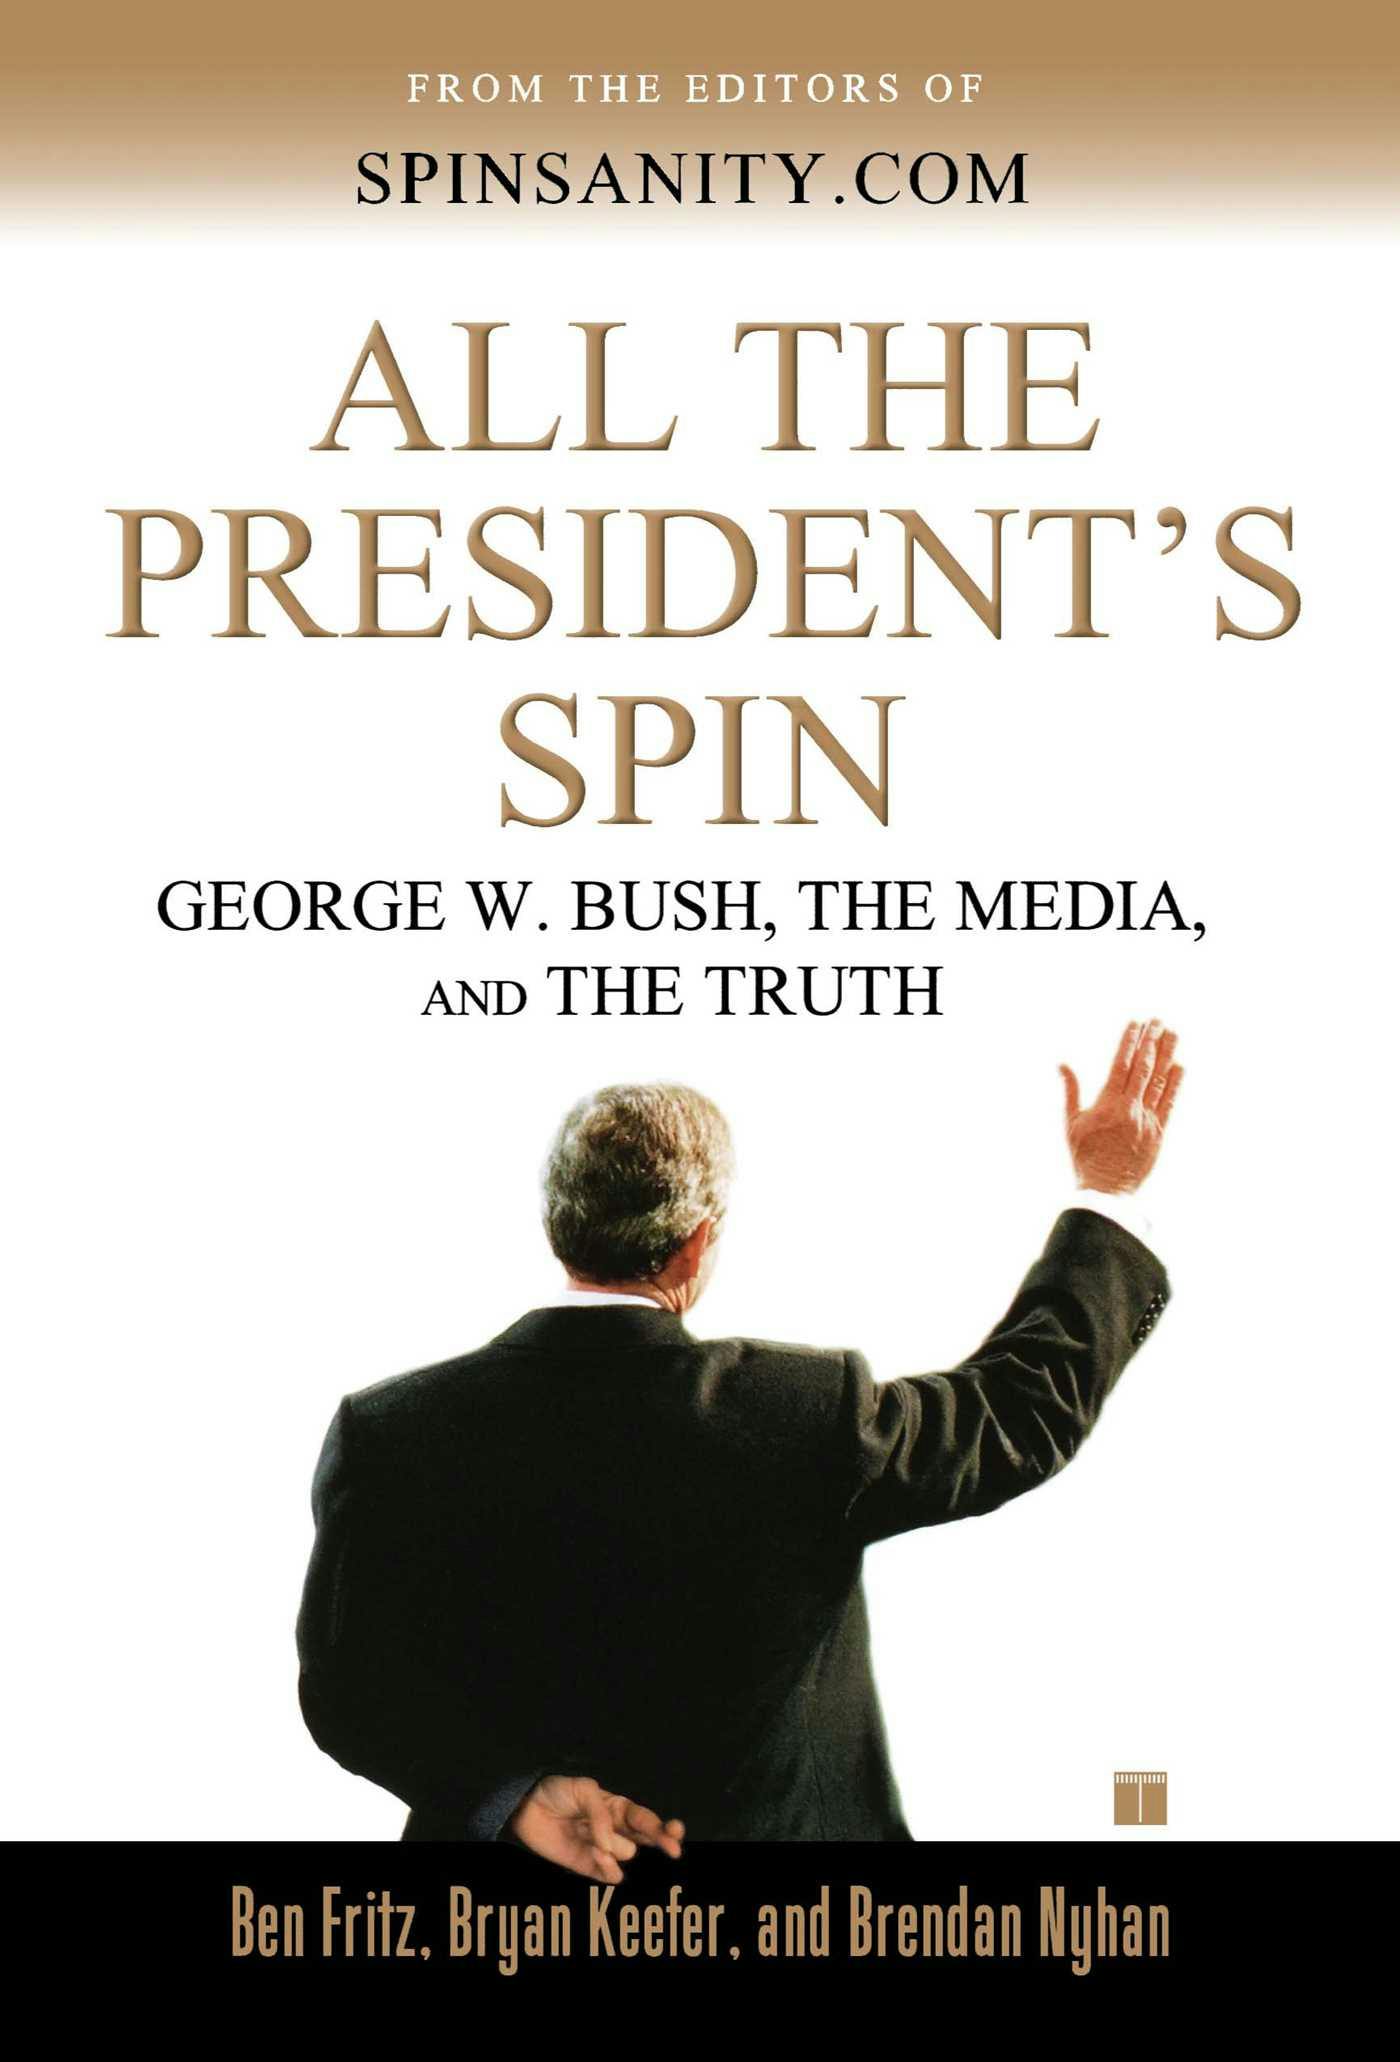 All the President's Spin: George W. Bush, the Media, and the Truth - Brendan Nyhan, Bryan Keefer, Ben Fritz